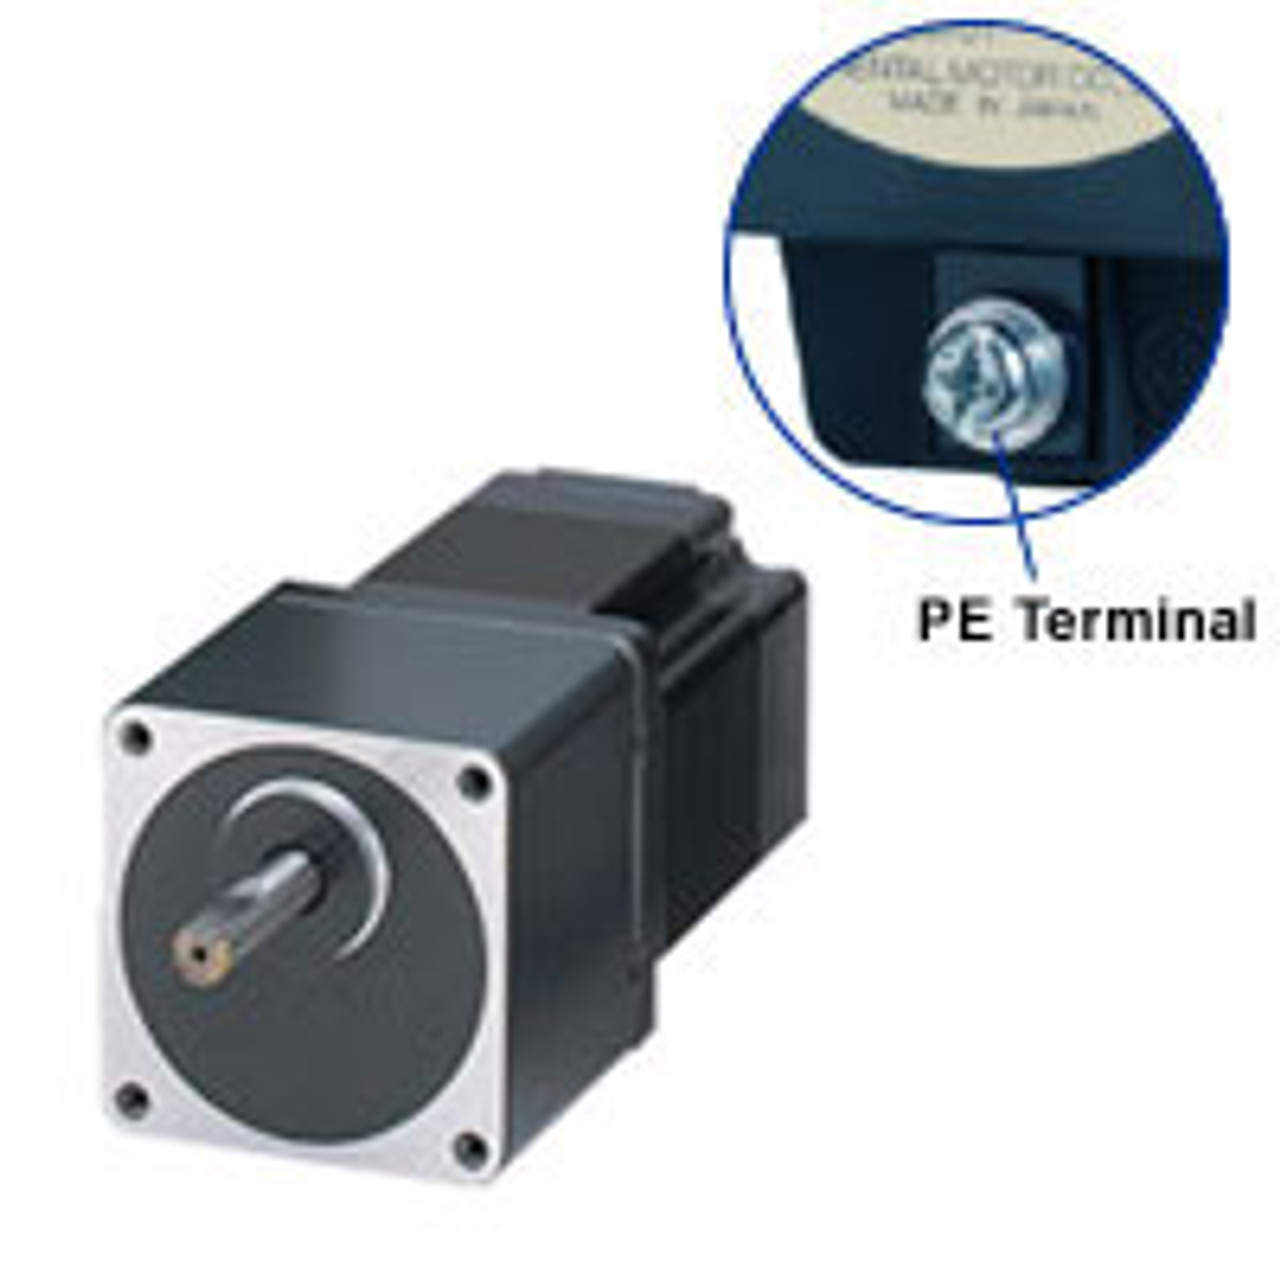 PK596BE-T3.6 - Product Image